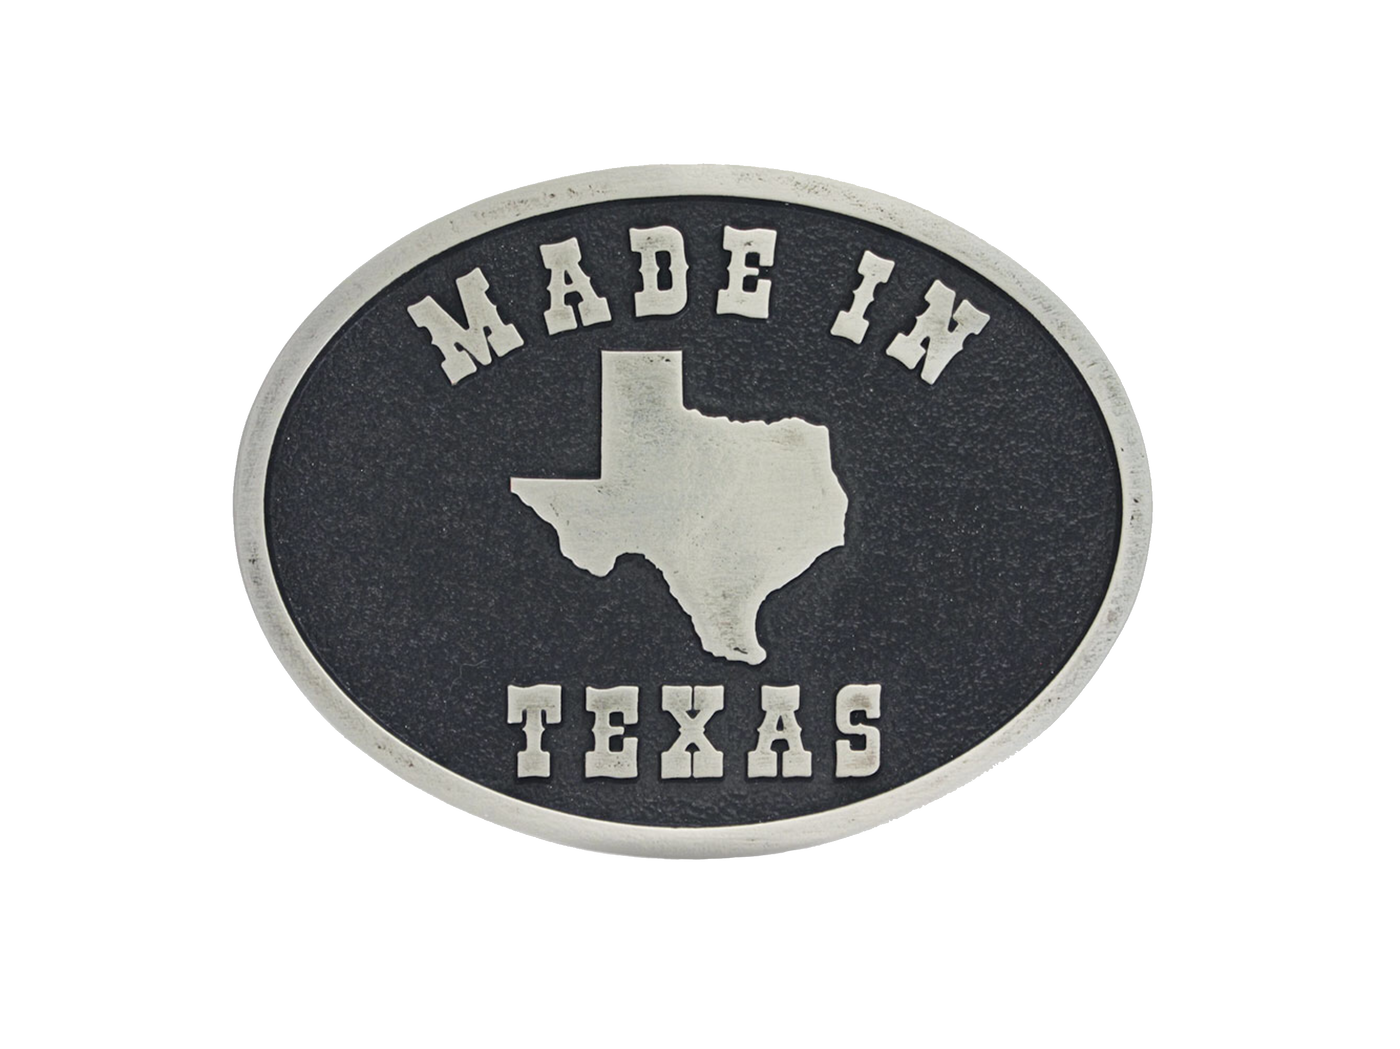 A silver toned oval buckle with deep black painted lettering "MADE IN TEXAS" across the top and bottom with a center design in the shape of Texas state. Standard 1/5 inch belt swivel. Available online and at our shop just outside Nashville in Smyrna, TN.